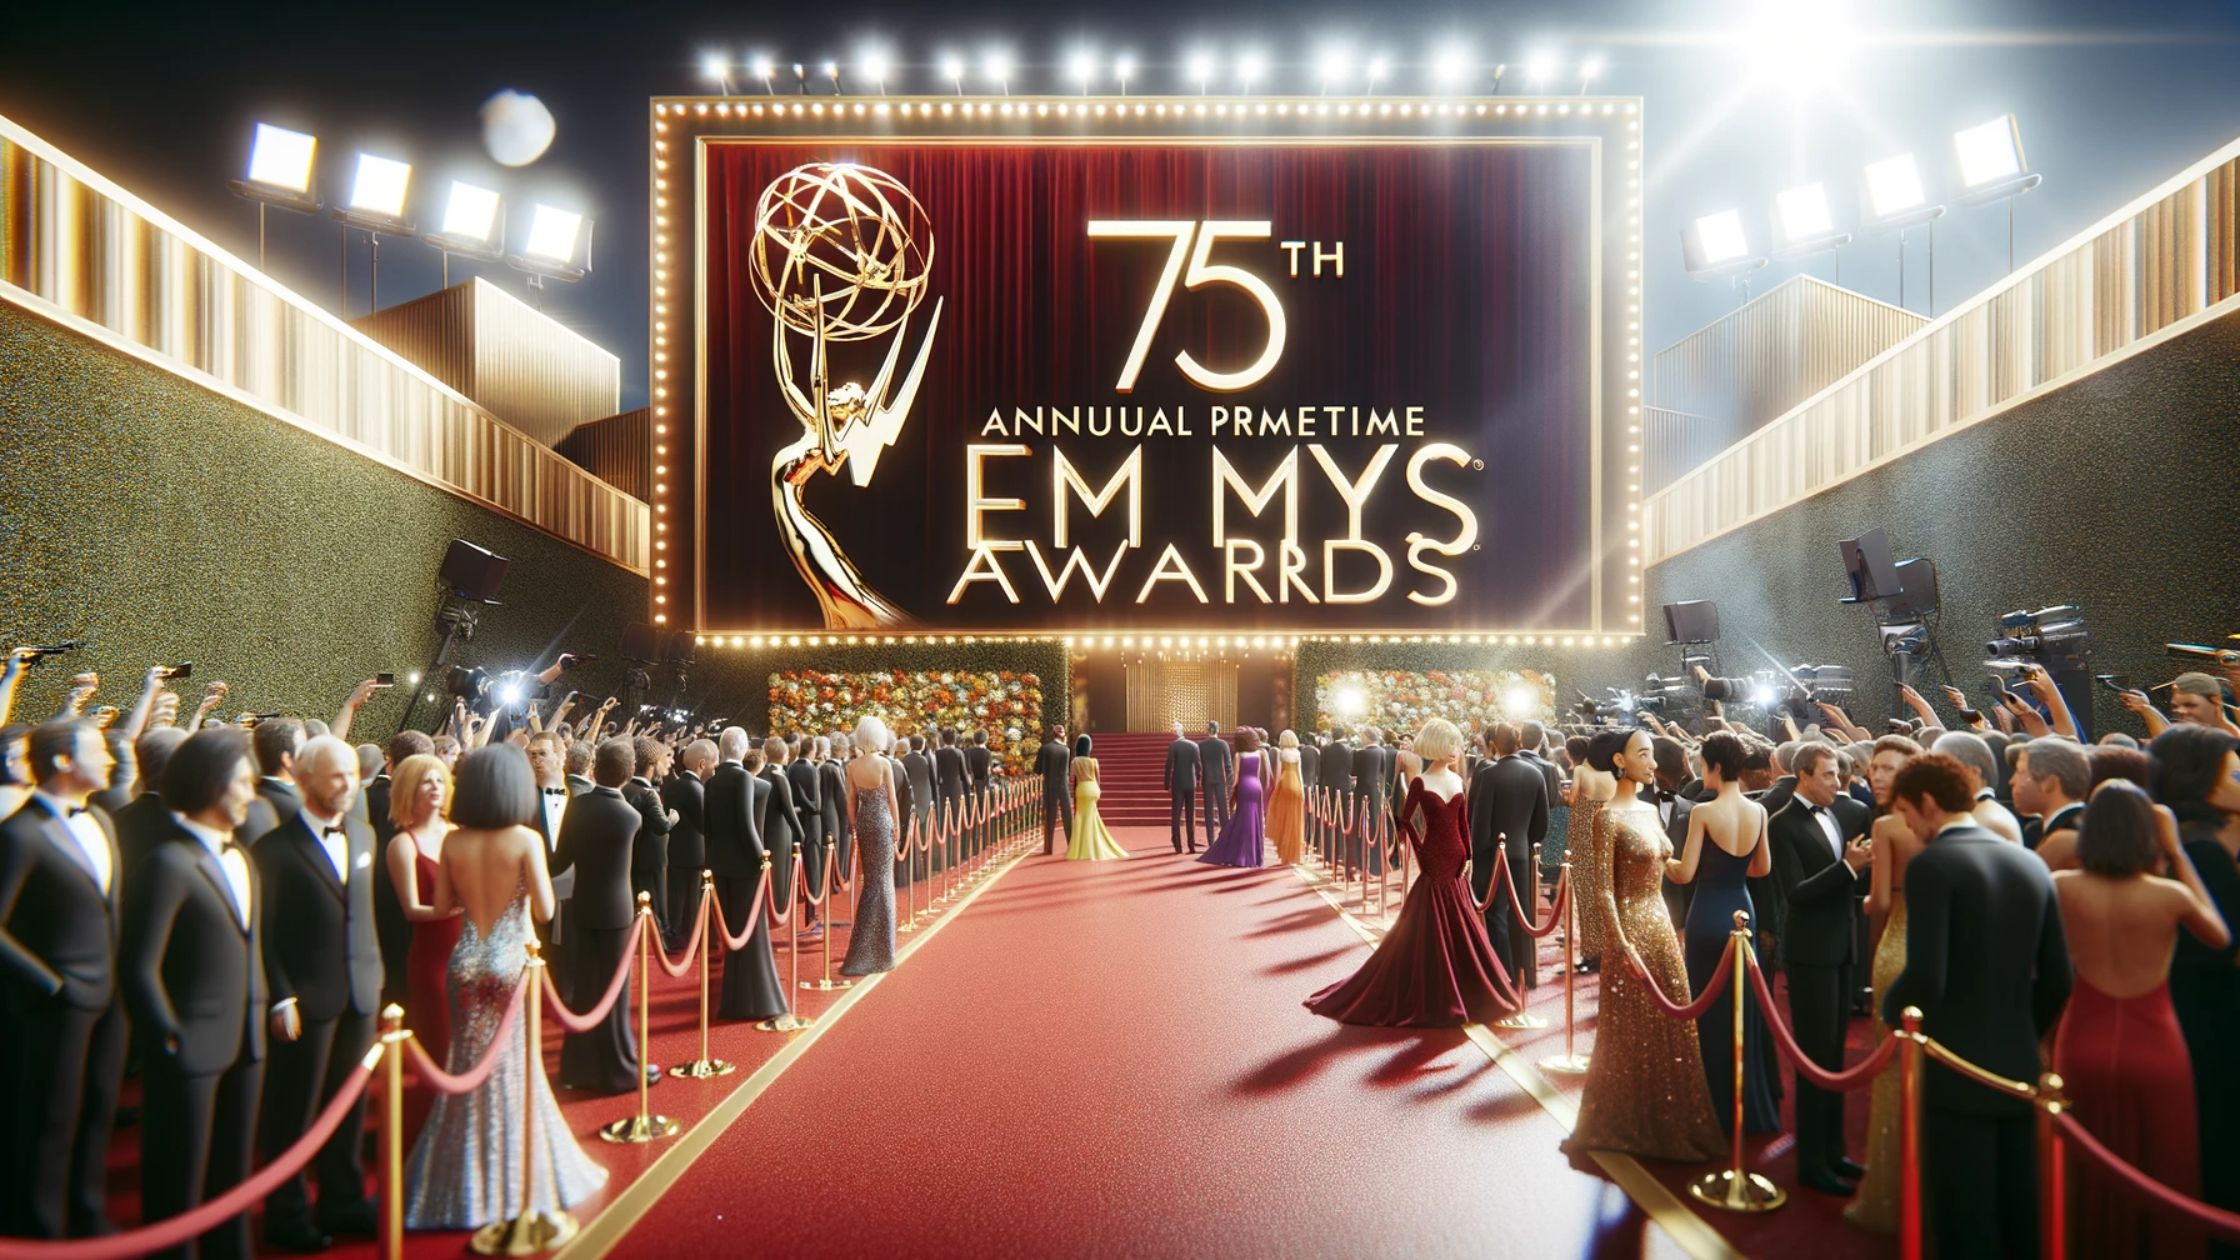 75th Annual Primetime Emmy Awards: Everything You Need to Know